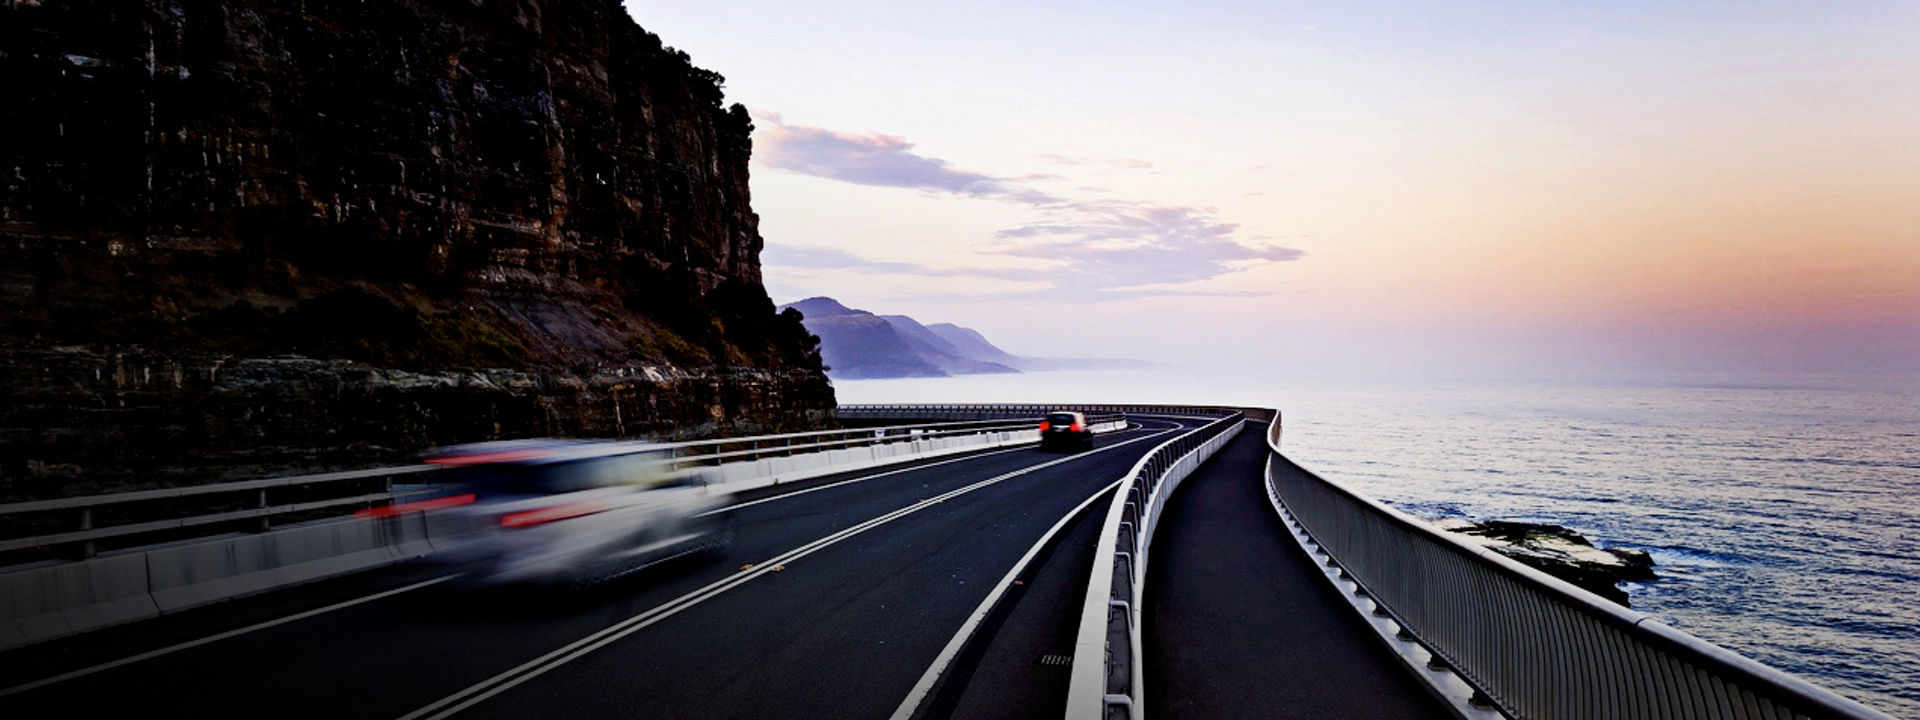 Cars equipped with Bridgestone tyres driving on a coastal highway with a sunset in the background